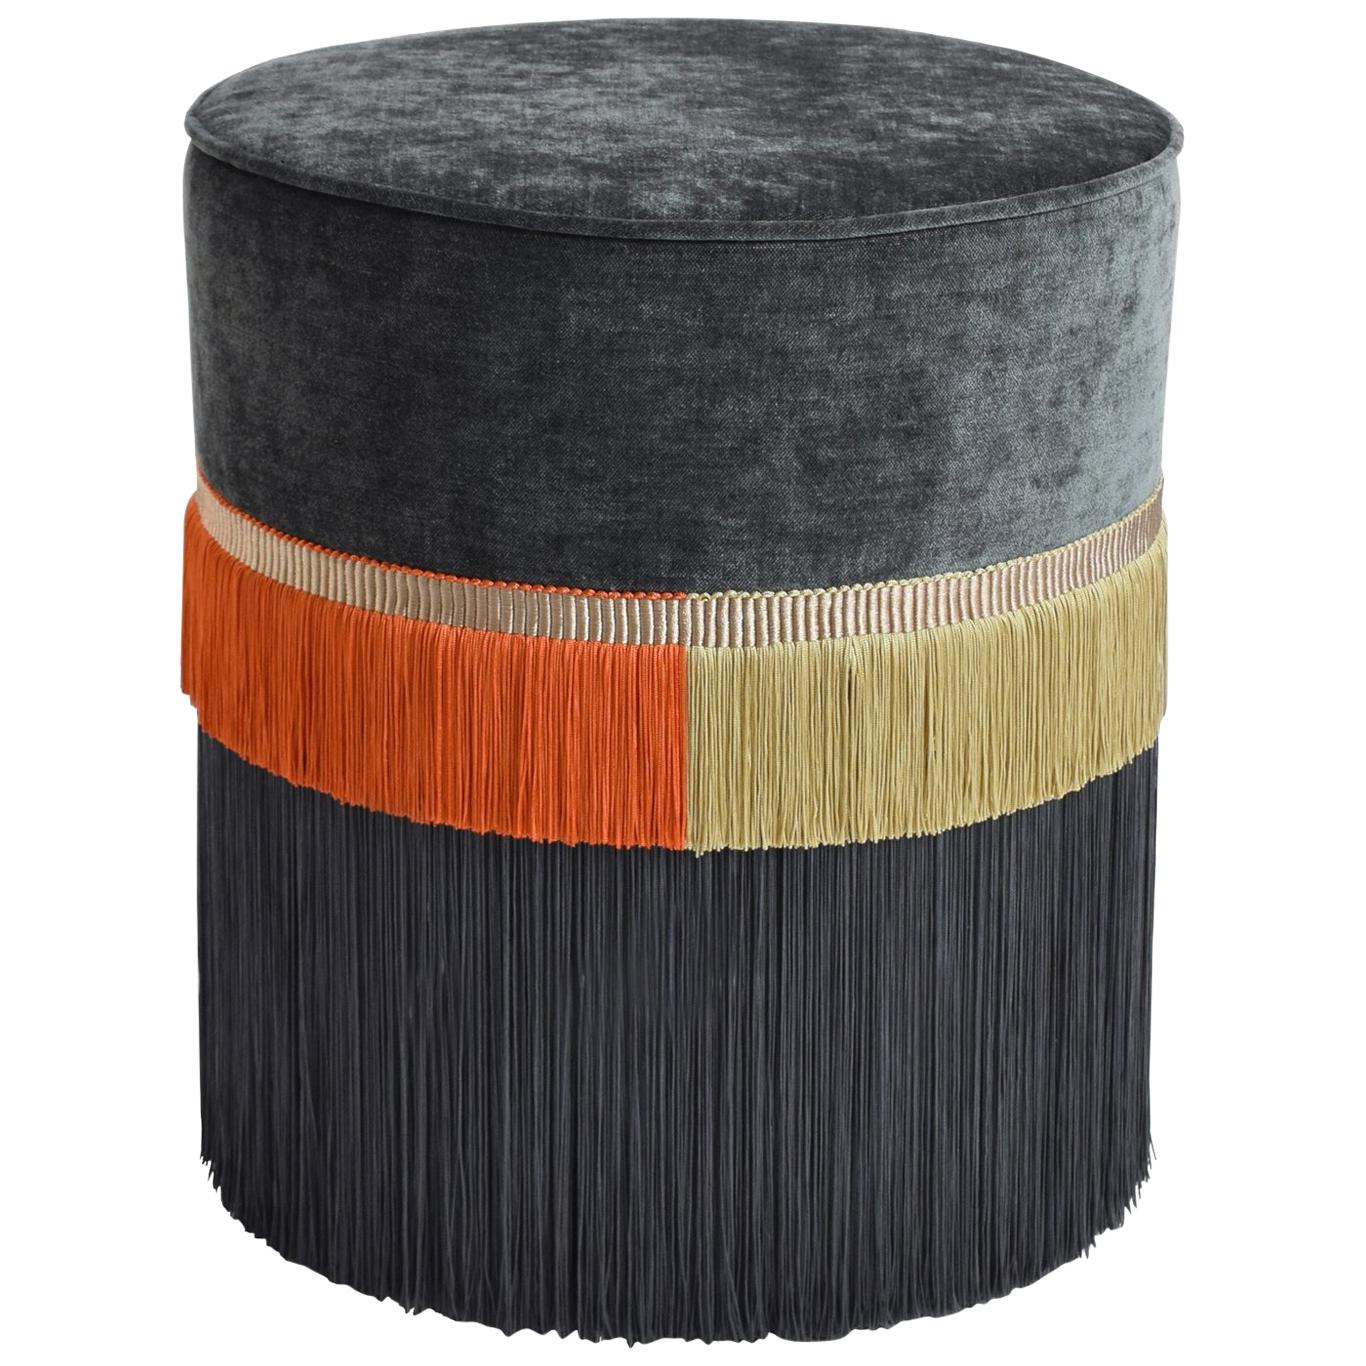 Couture Gray Pouf with Line Fringe by Lorenza Bozzoli Design